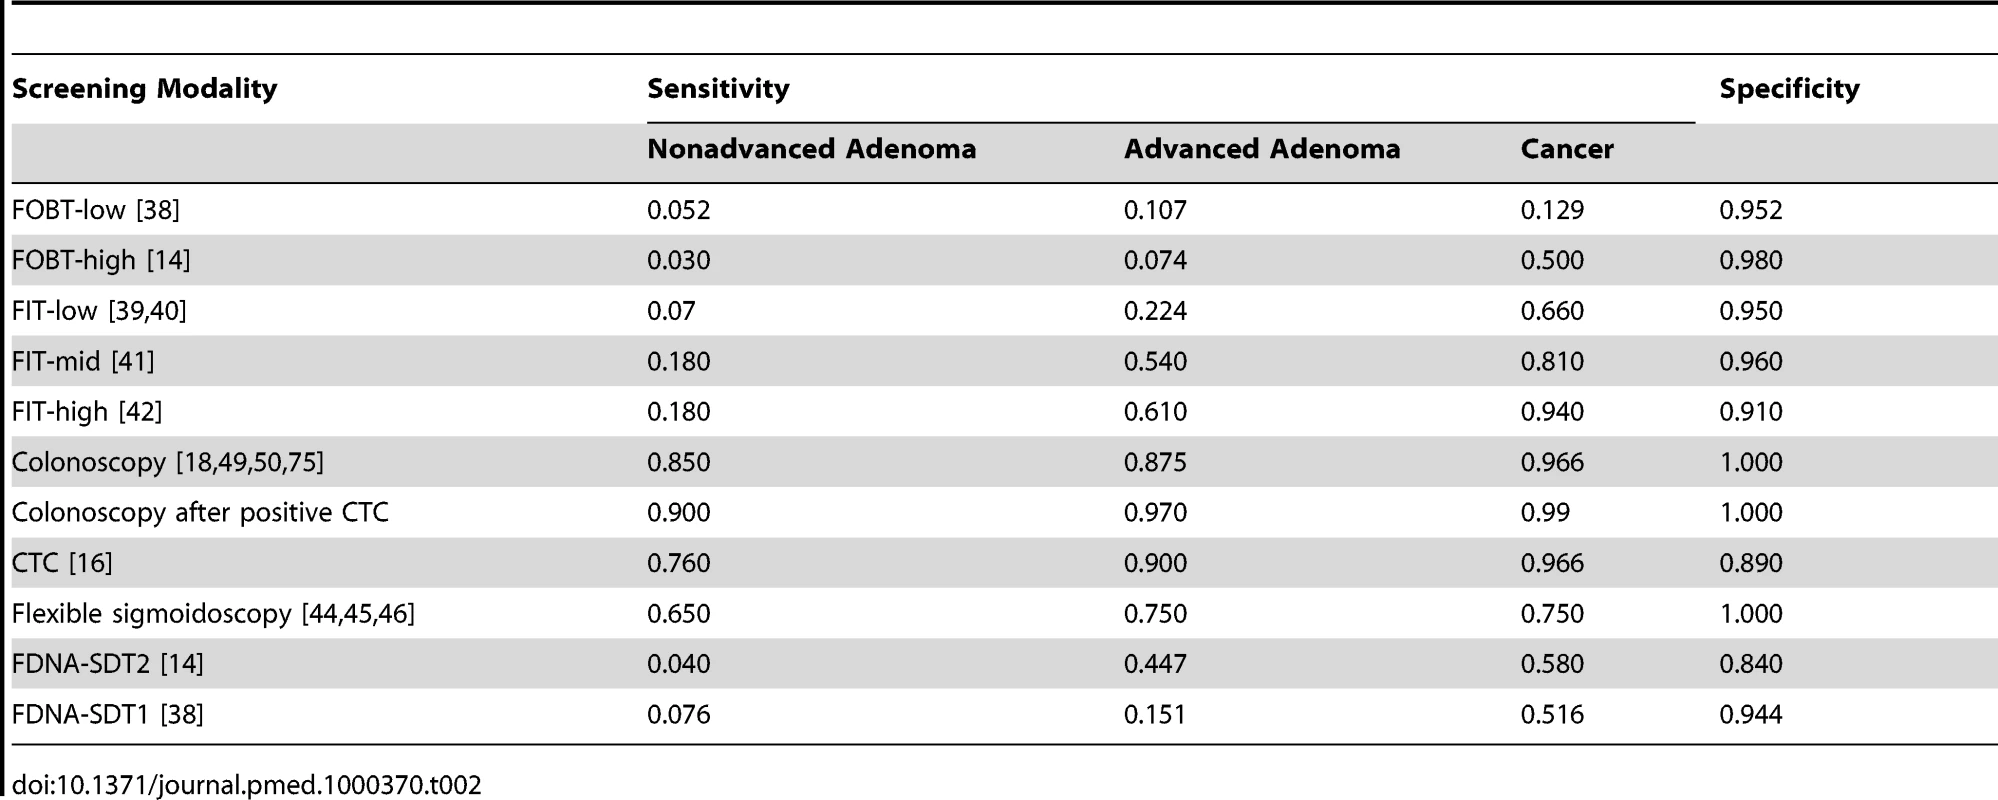 Base case test performance characteristics for the screening modalities.